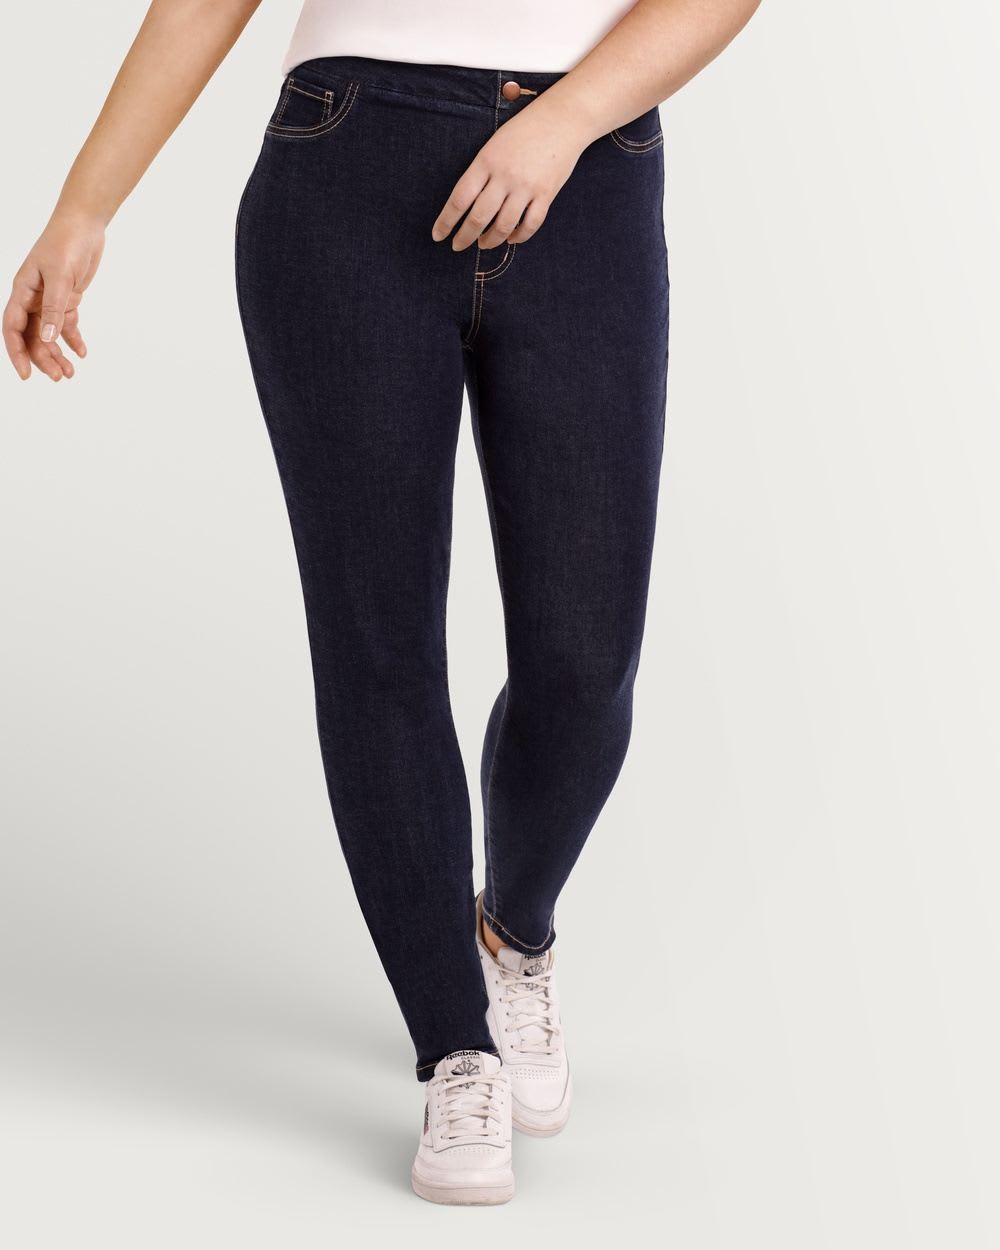 Rinse Wash Pull On Jeans - Petite